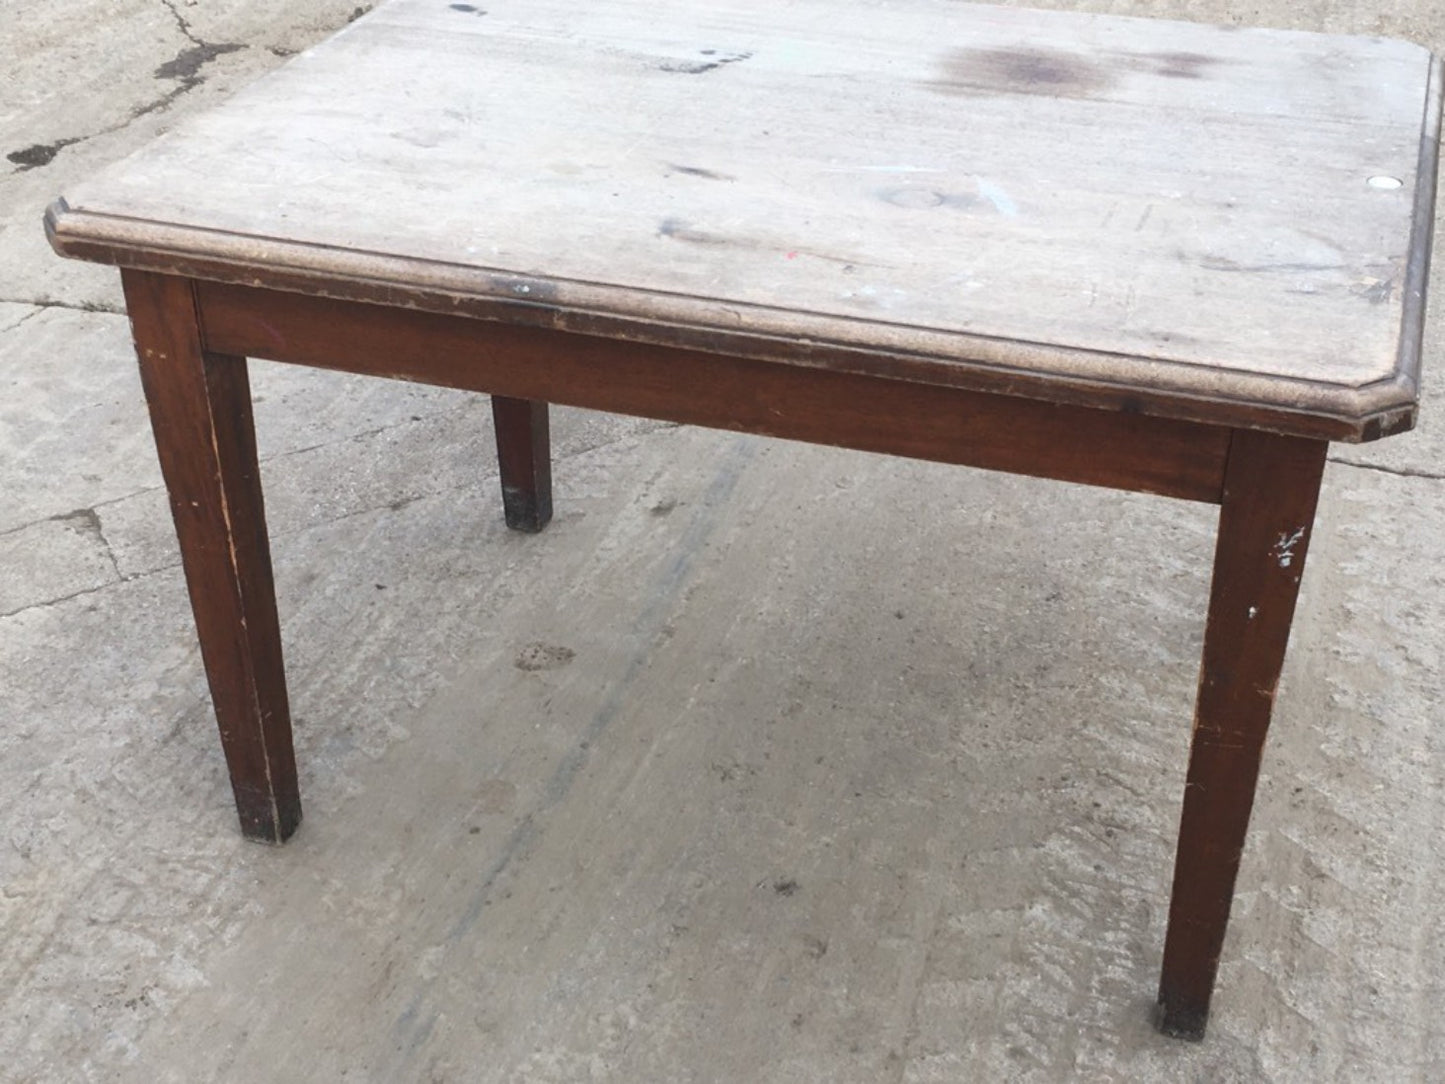 Reclaimed Old Vintage 4’3” Hardwood Kitchen Dining Table Straight Square Legs